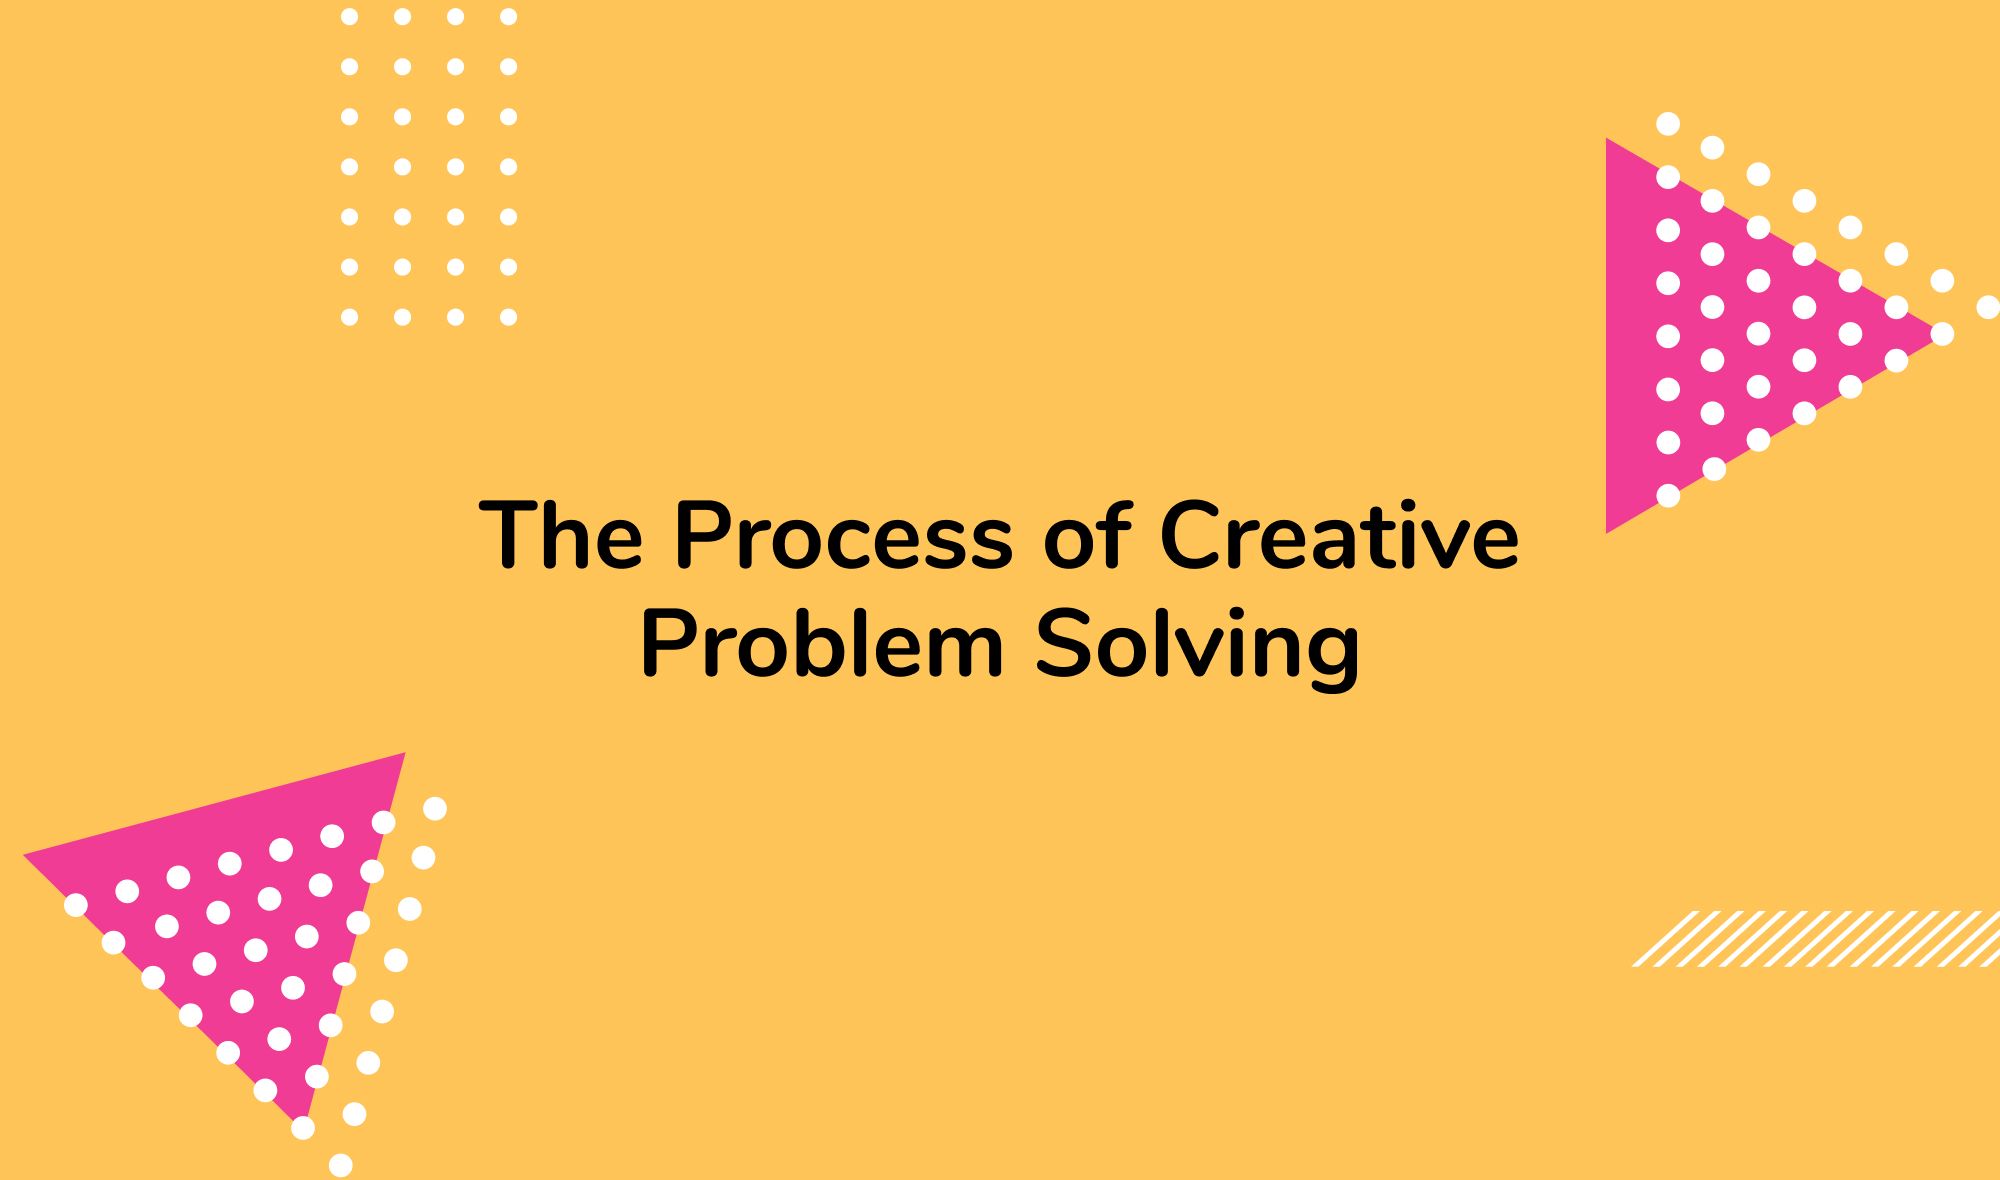 The Process of Creative Problem Solving